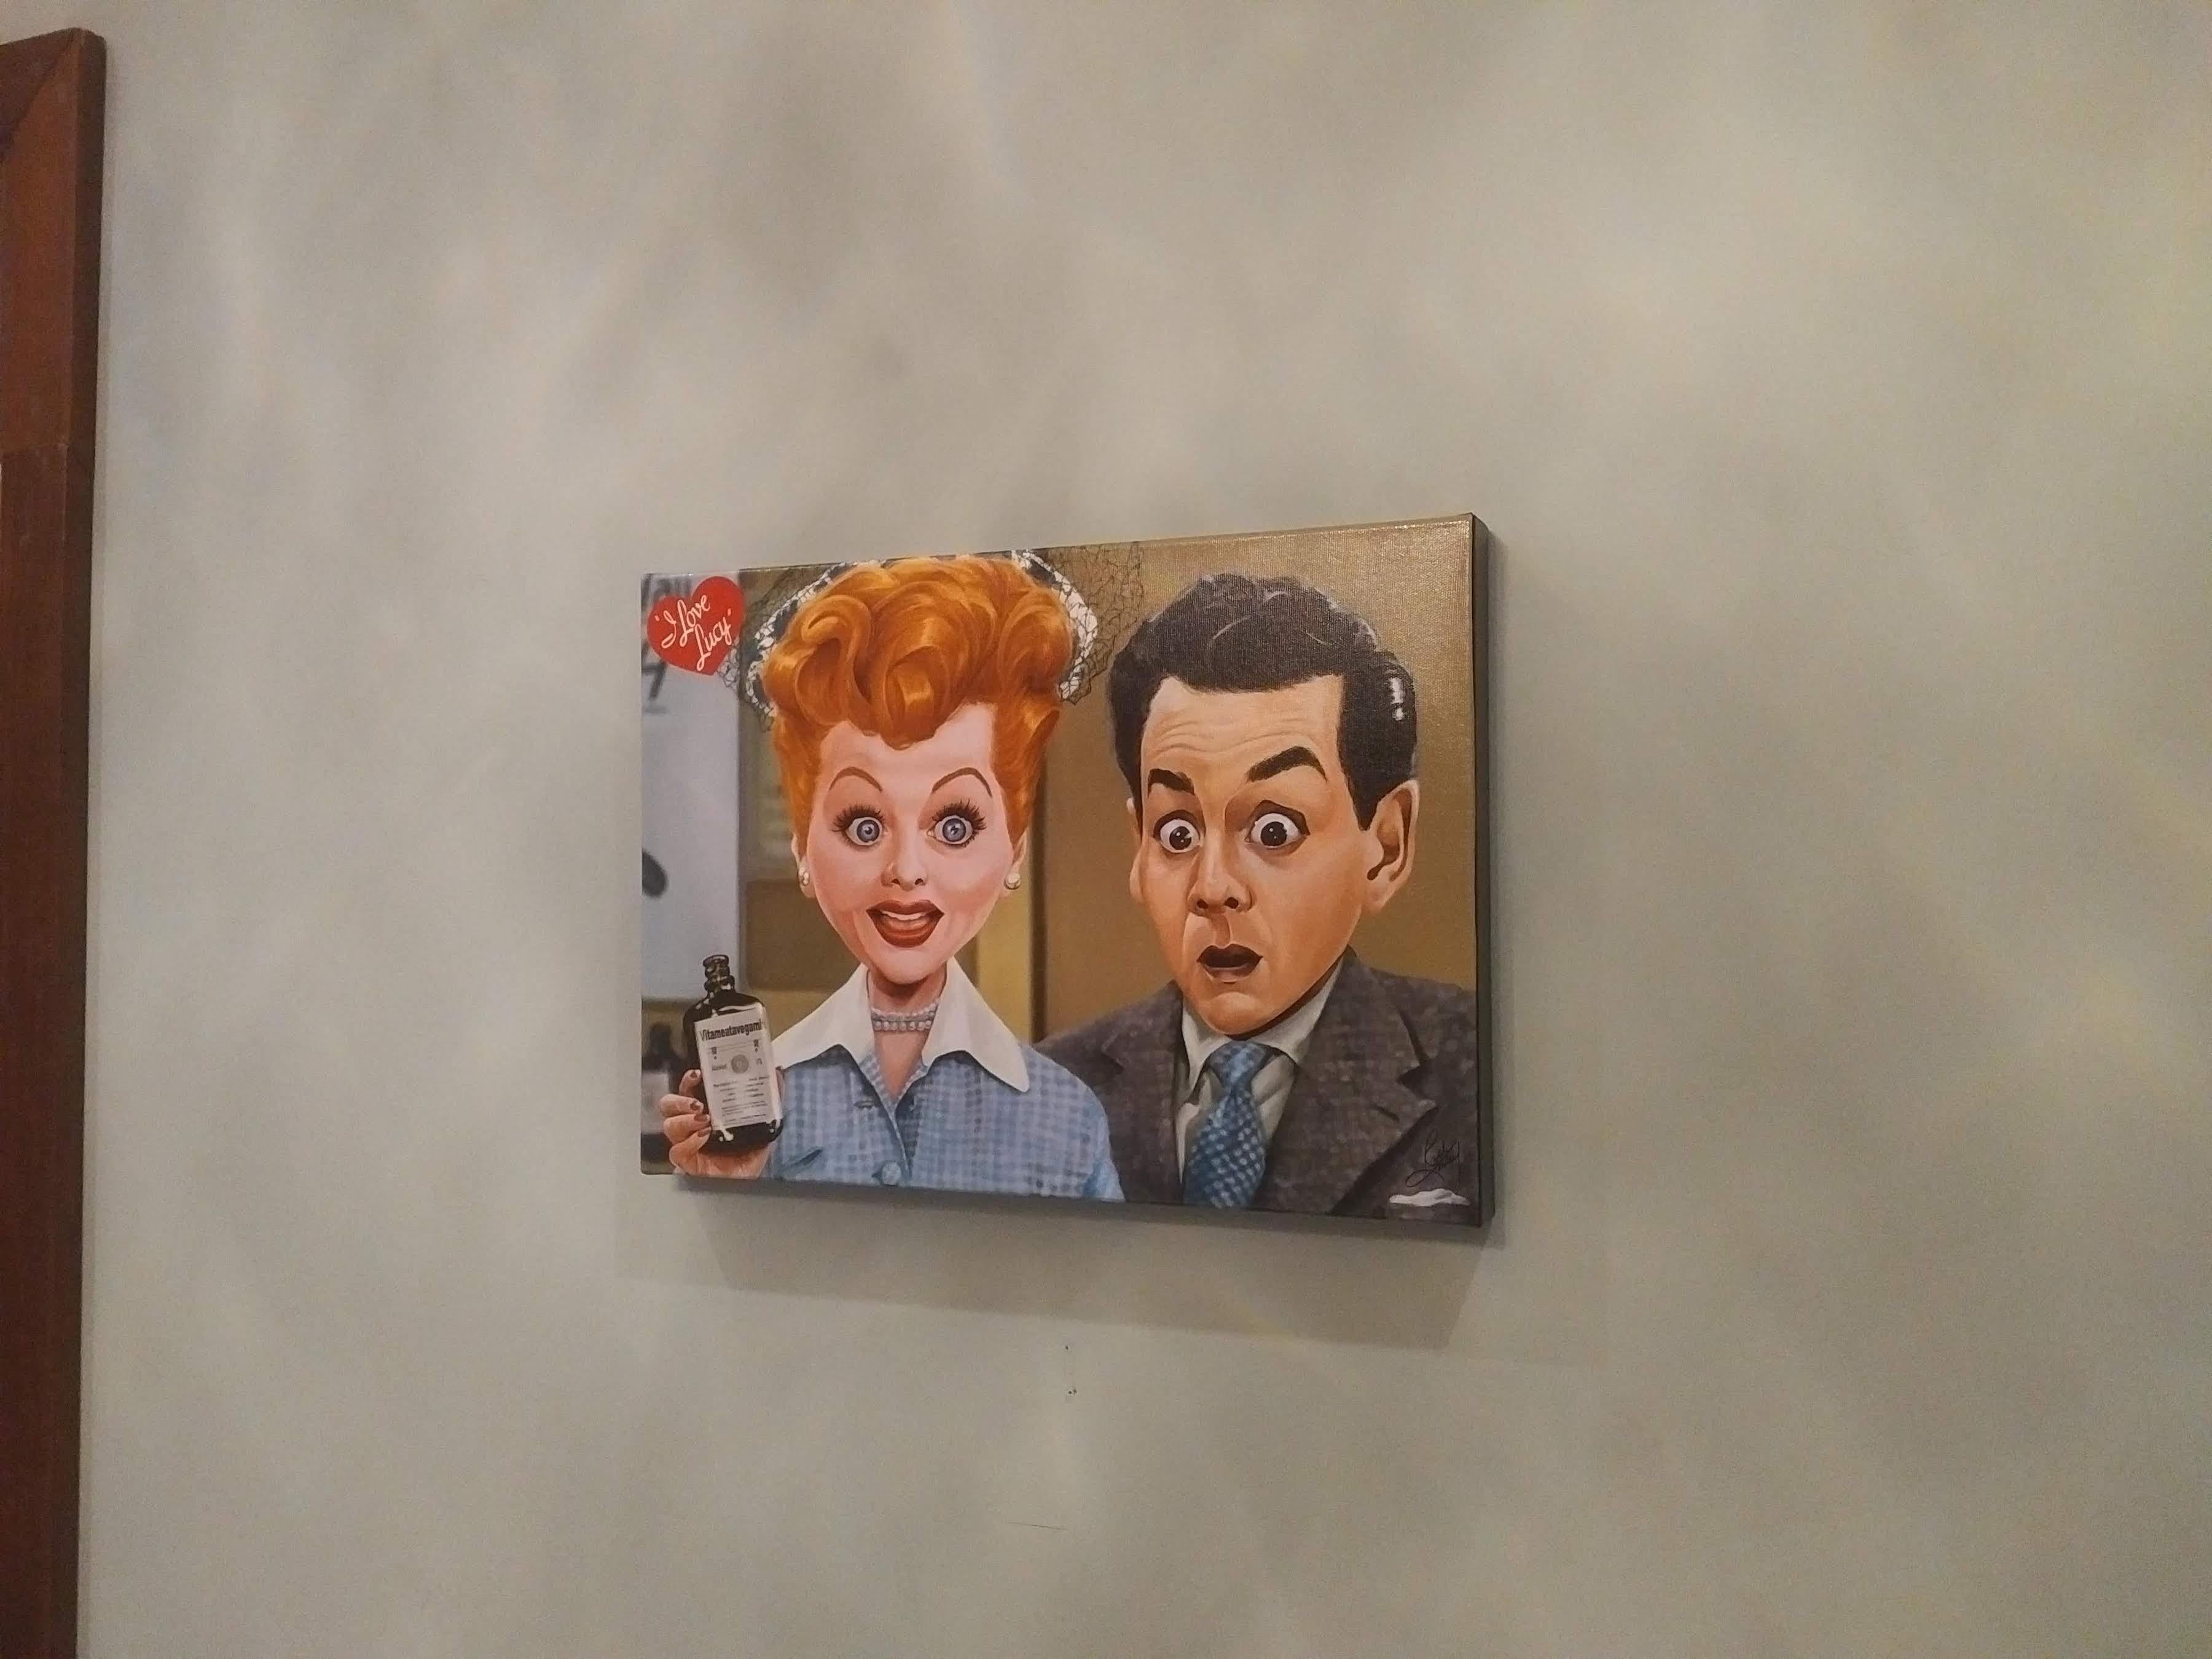 I Love Lucy TM Vitameatavegamin TM Licensed Artwork on Canvas - Contemporary Print by Rich Conley